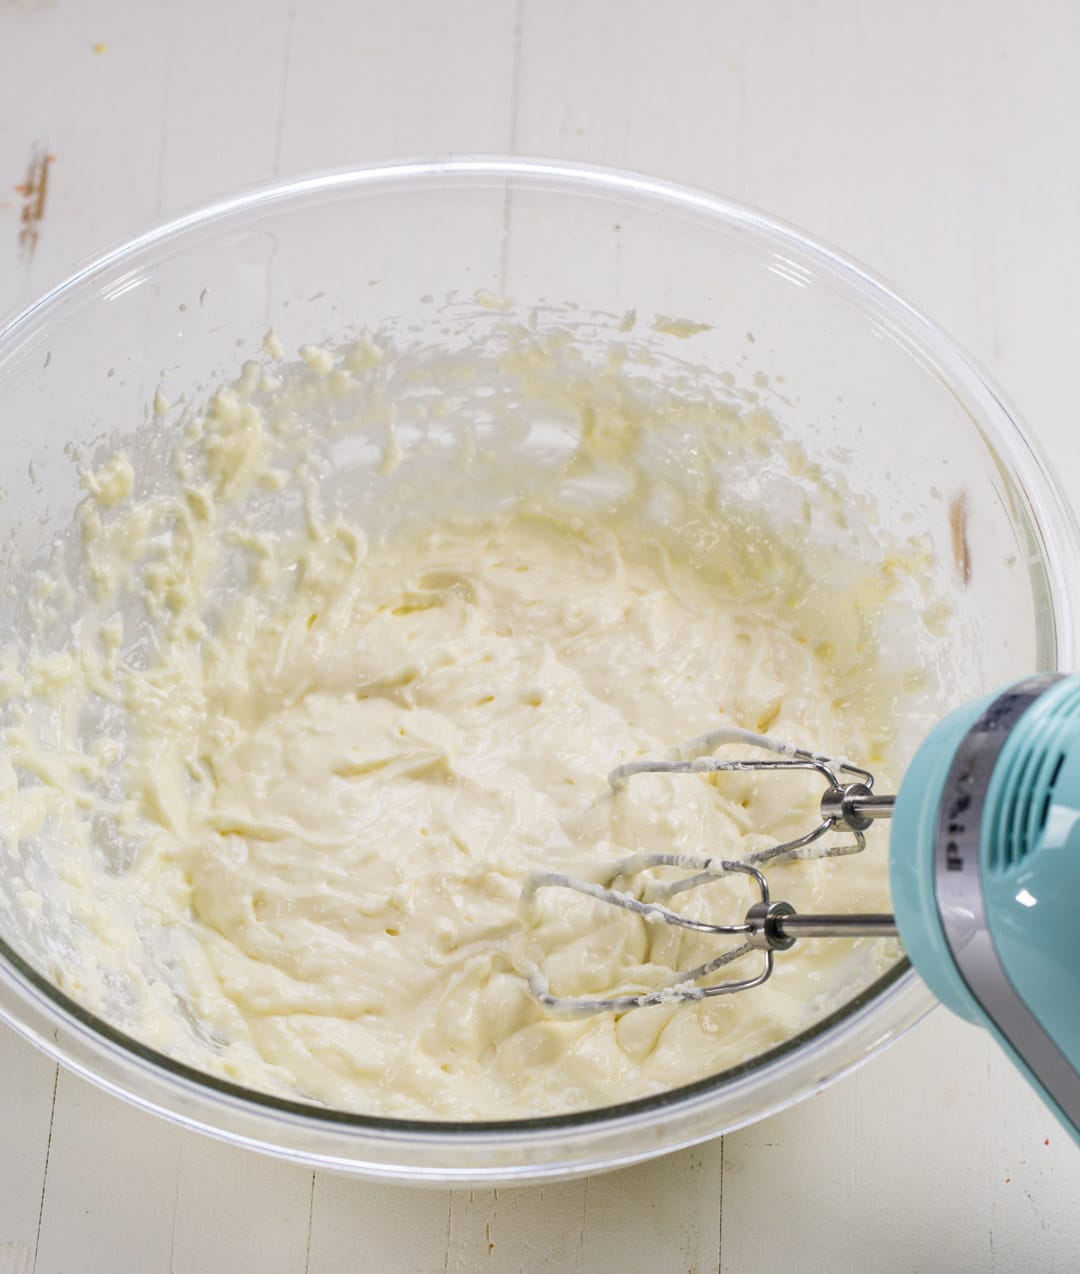 Cream cheese mixture in mixing bowl.